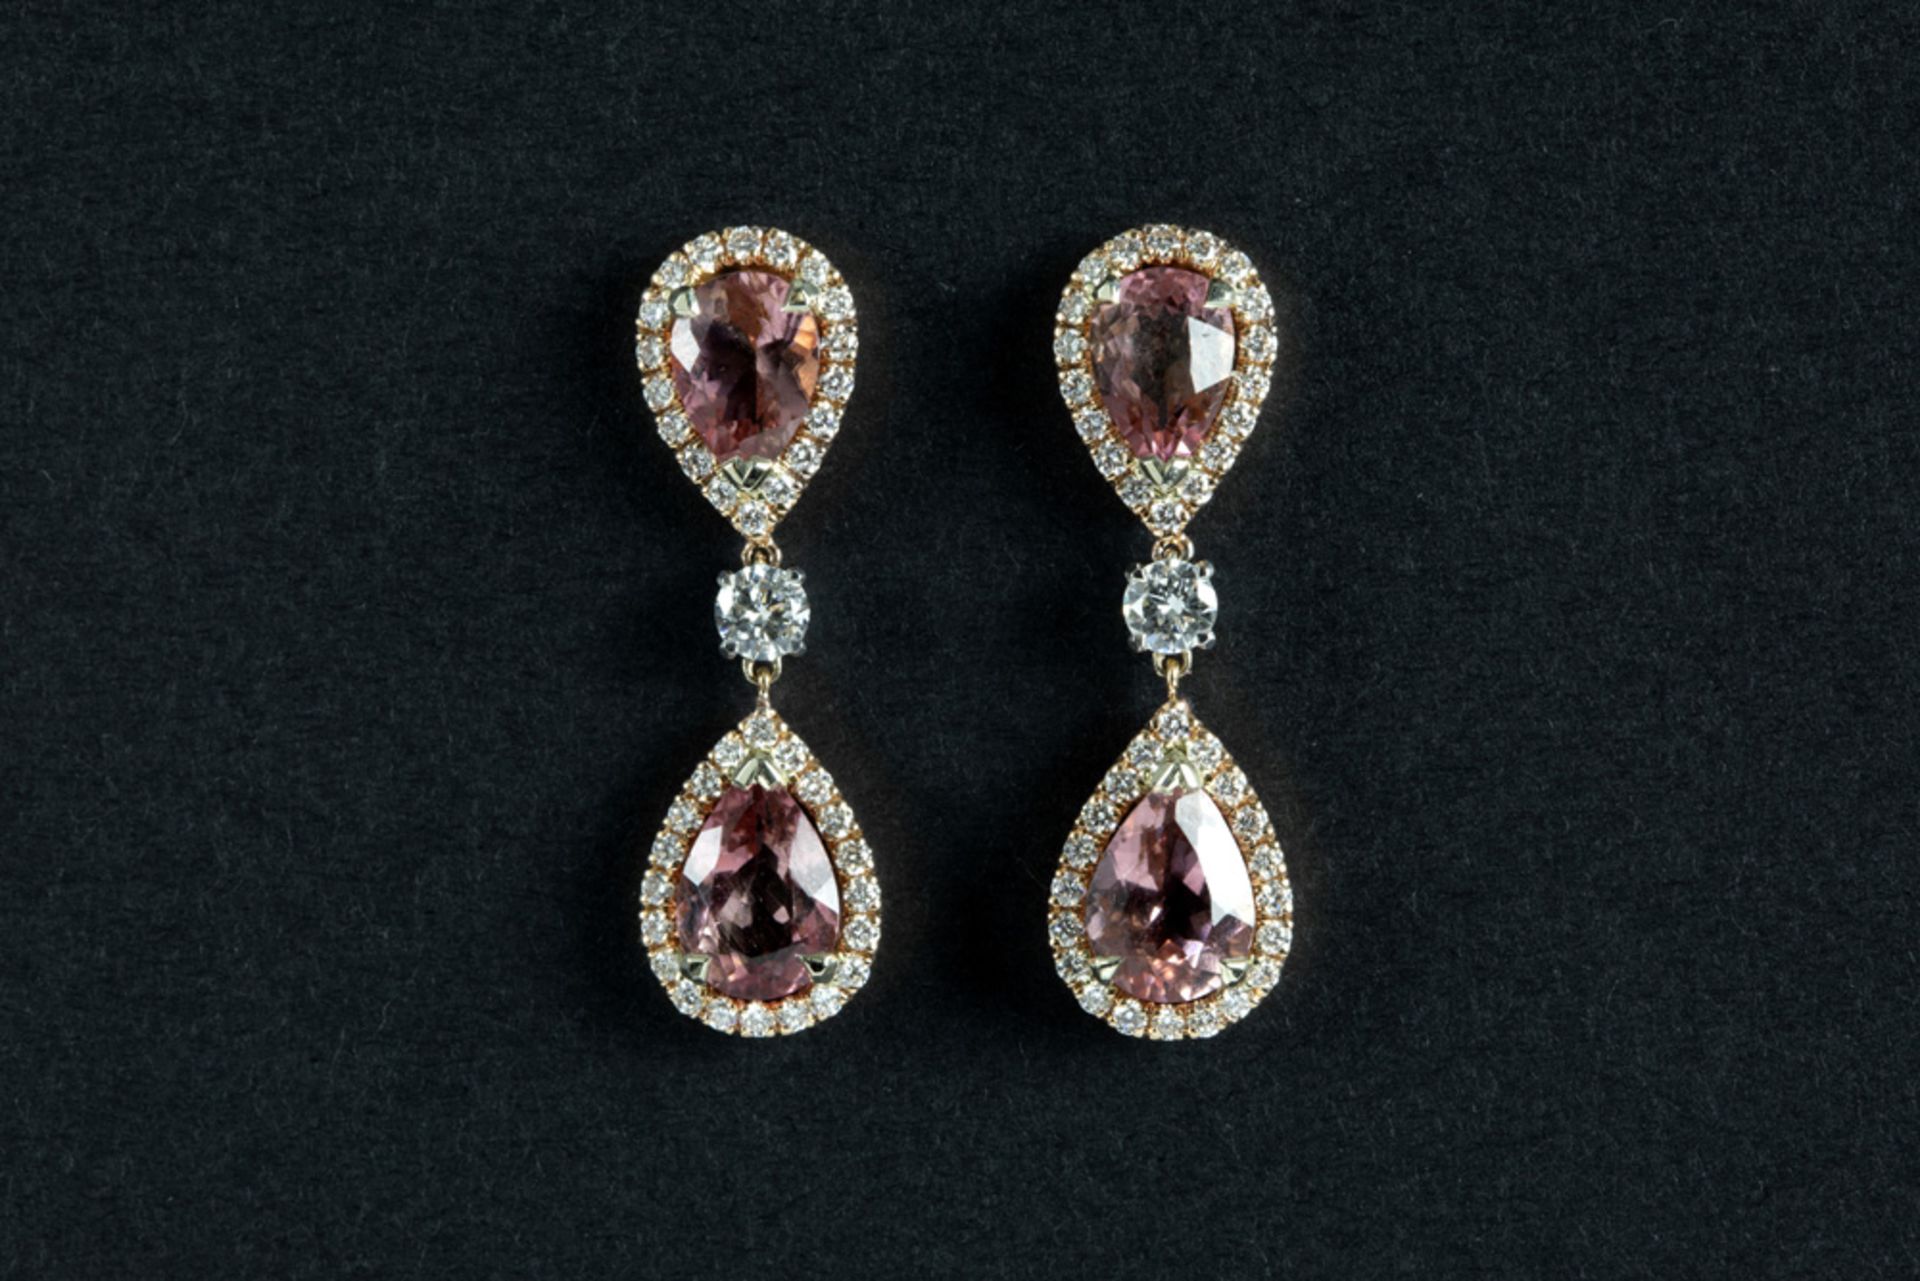 pair of beautiful earrings in white and pink gold (18 carat) with 5,20 carat of Tourmalines with